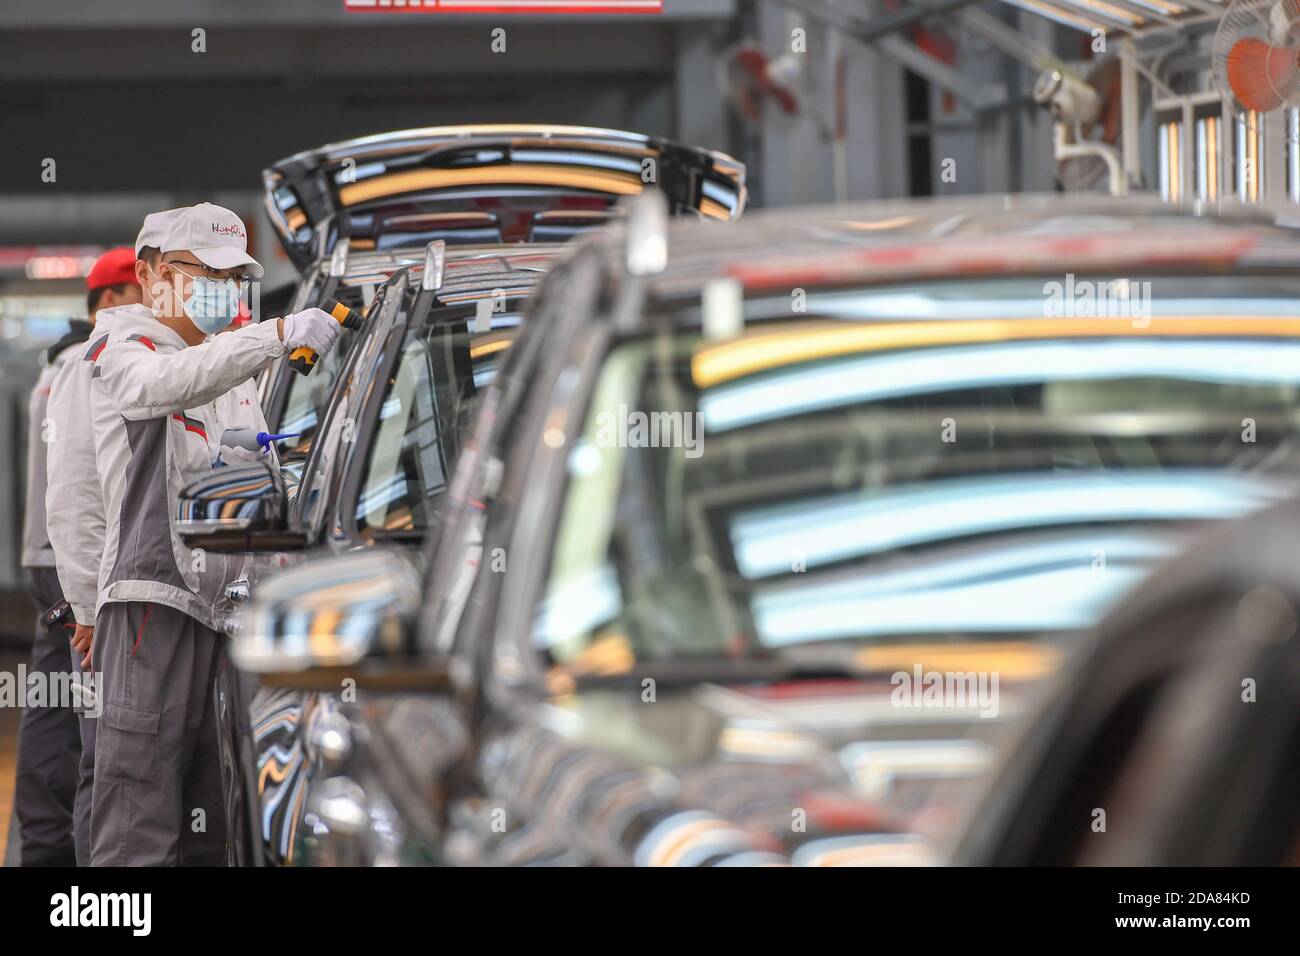 Changchun, China's Jilin Province. 23rd Sep, 2020. Workers check vehicles at the general assembly line of Hongqi, the leading sedan brand of First Automotive Works (FAW) Group Co. Ltd., in Changchun, northeast China's Jilin Province, Sept. 23, 2020. First Automotive Works (FAW) Group Co. Ltd., China's leading automaker, sold more than 3.01 million vehicles in the first 10 months of this year, an increase of 7.8 percent year on year, the company said. Credit: Zhang Nan/Xinhua/Alamy Live News Stock Photo